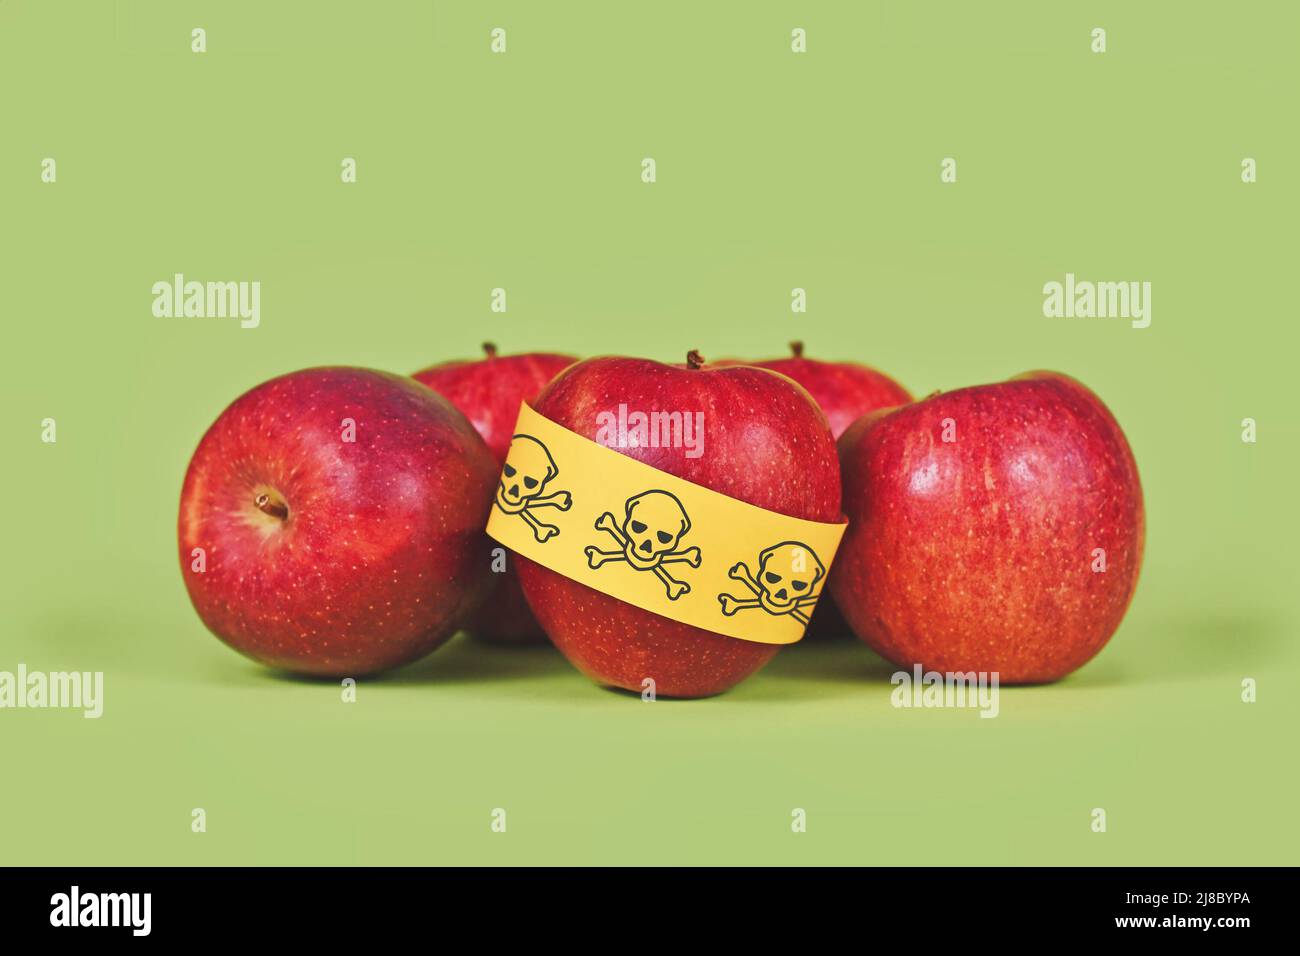 Apples with poison skull symbol sticker on green background. Concept of pesticide residues in agricultural food Stock Photo